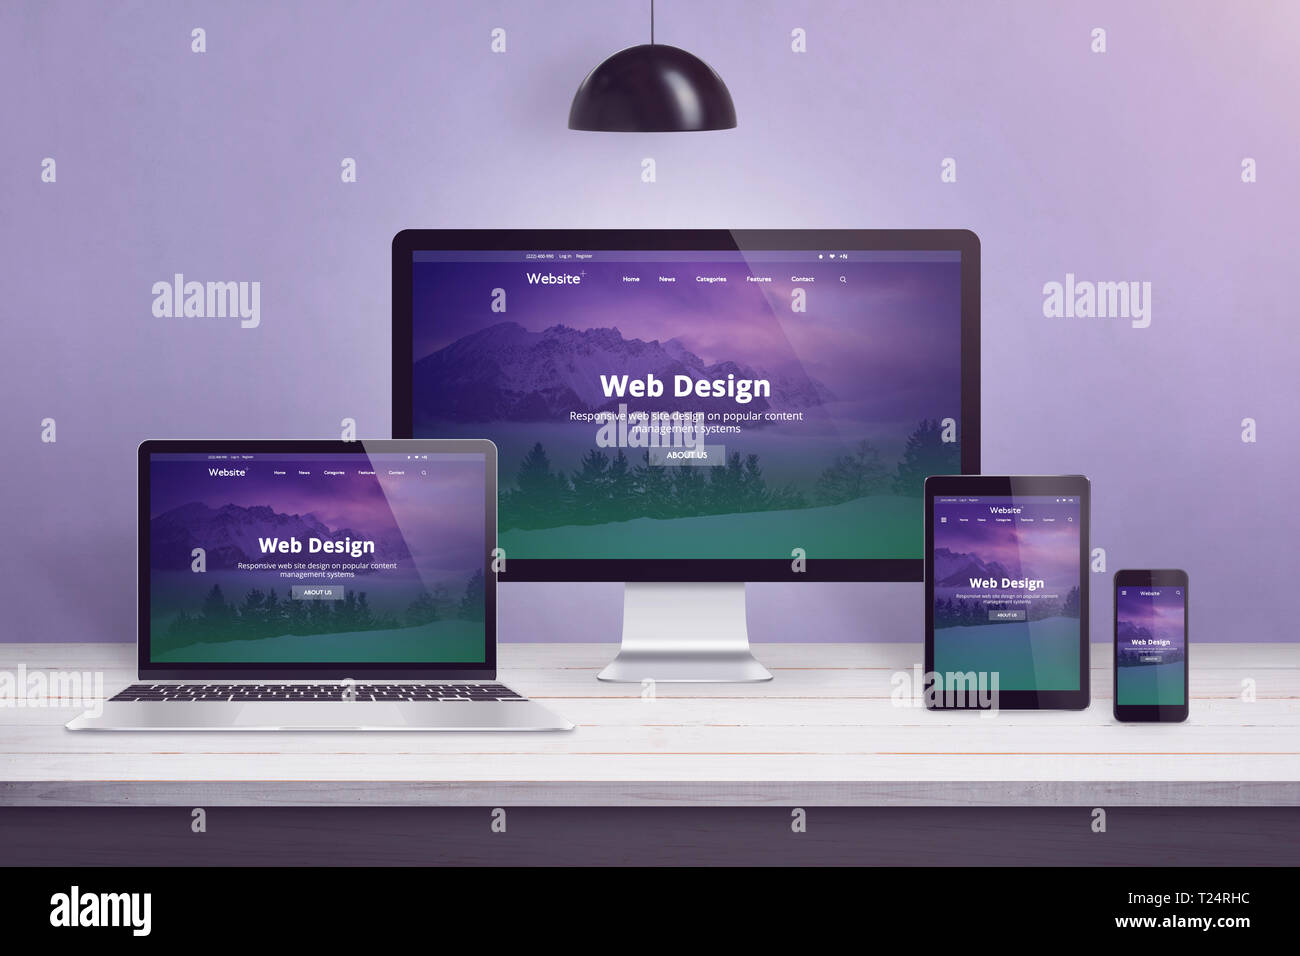 Flat design web site concept on multiple devices. Work desk with laptop, computer display, smart phone and tablet. Purple wall in bacground. Stock Photo